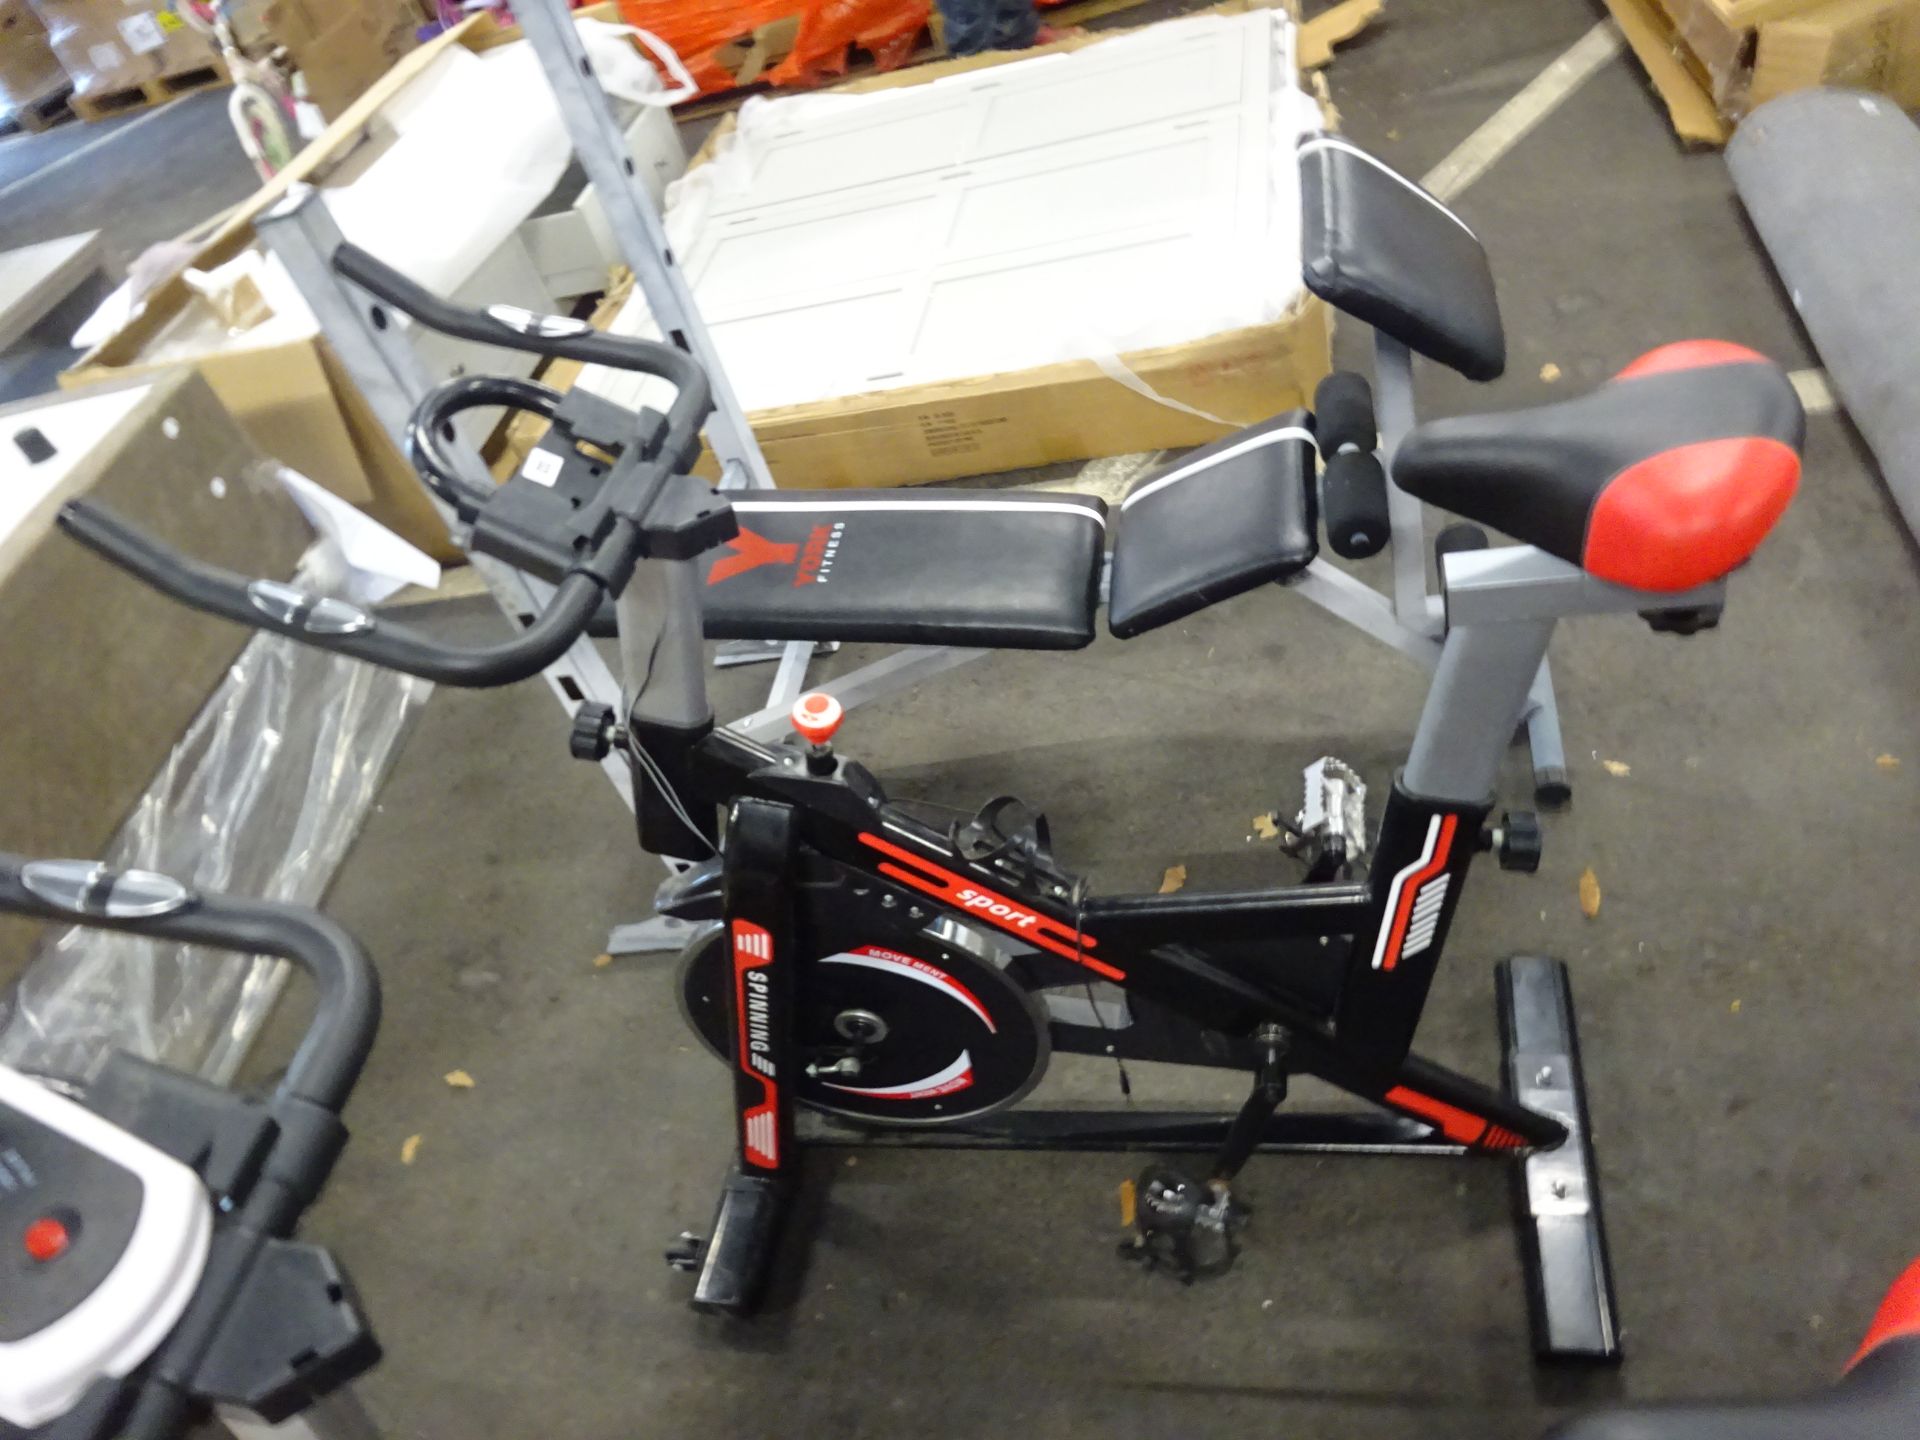 Black & Red Exercise Bike - USED - COLLECTION ONLY - One Pedal Has Fell Off